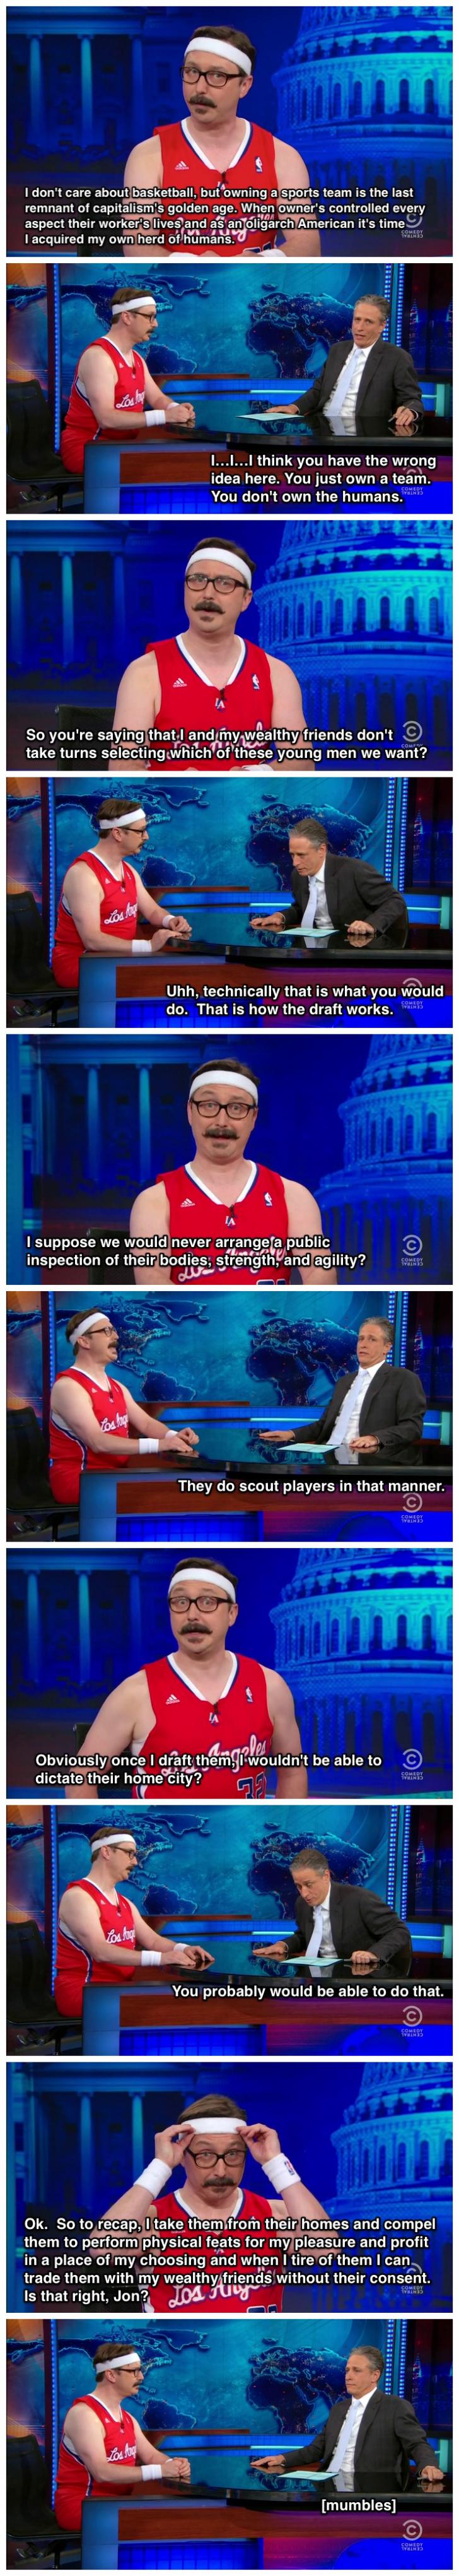 John Hodgman explains to Jon Stewart why he wants to but the LA Clippers